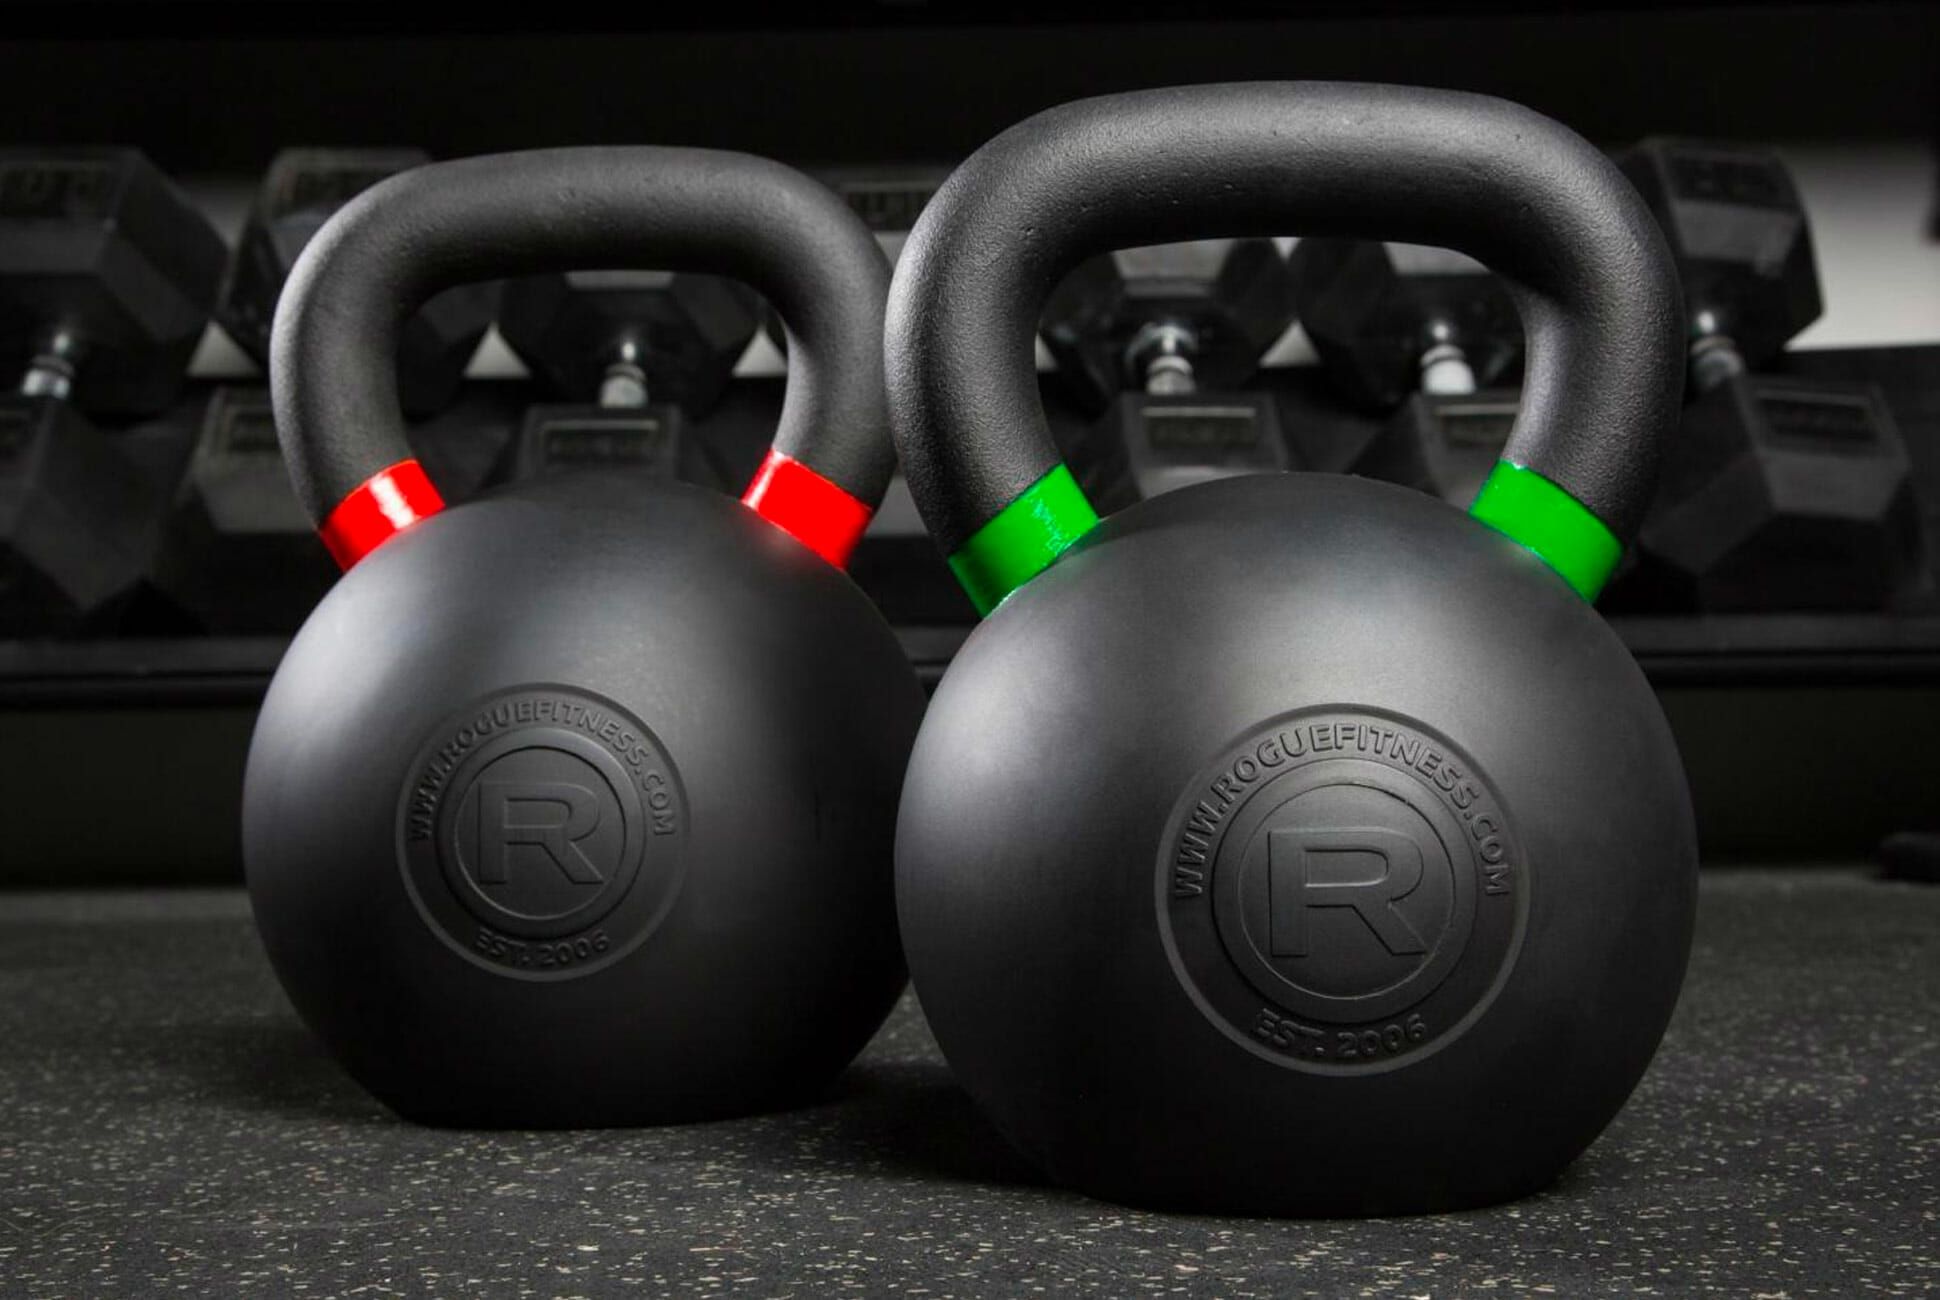 two rogue fitness powder coated steel kettlebells